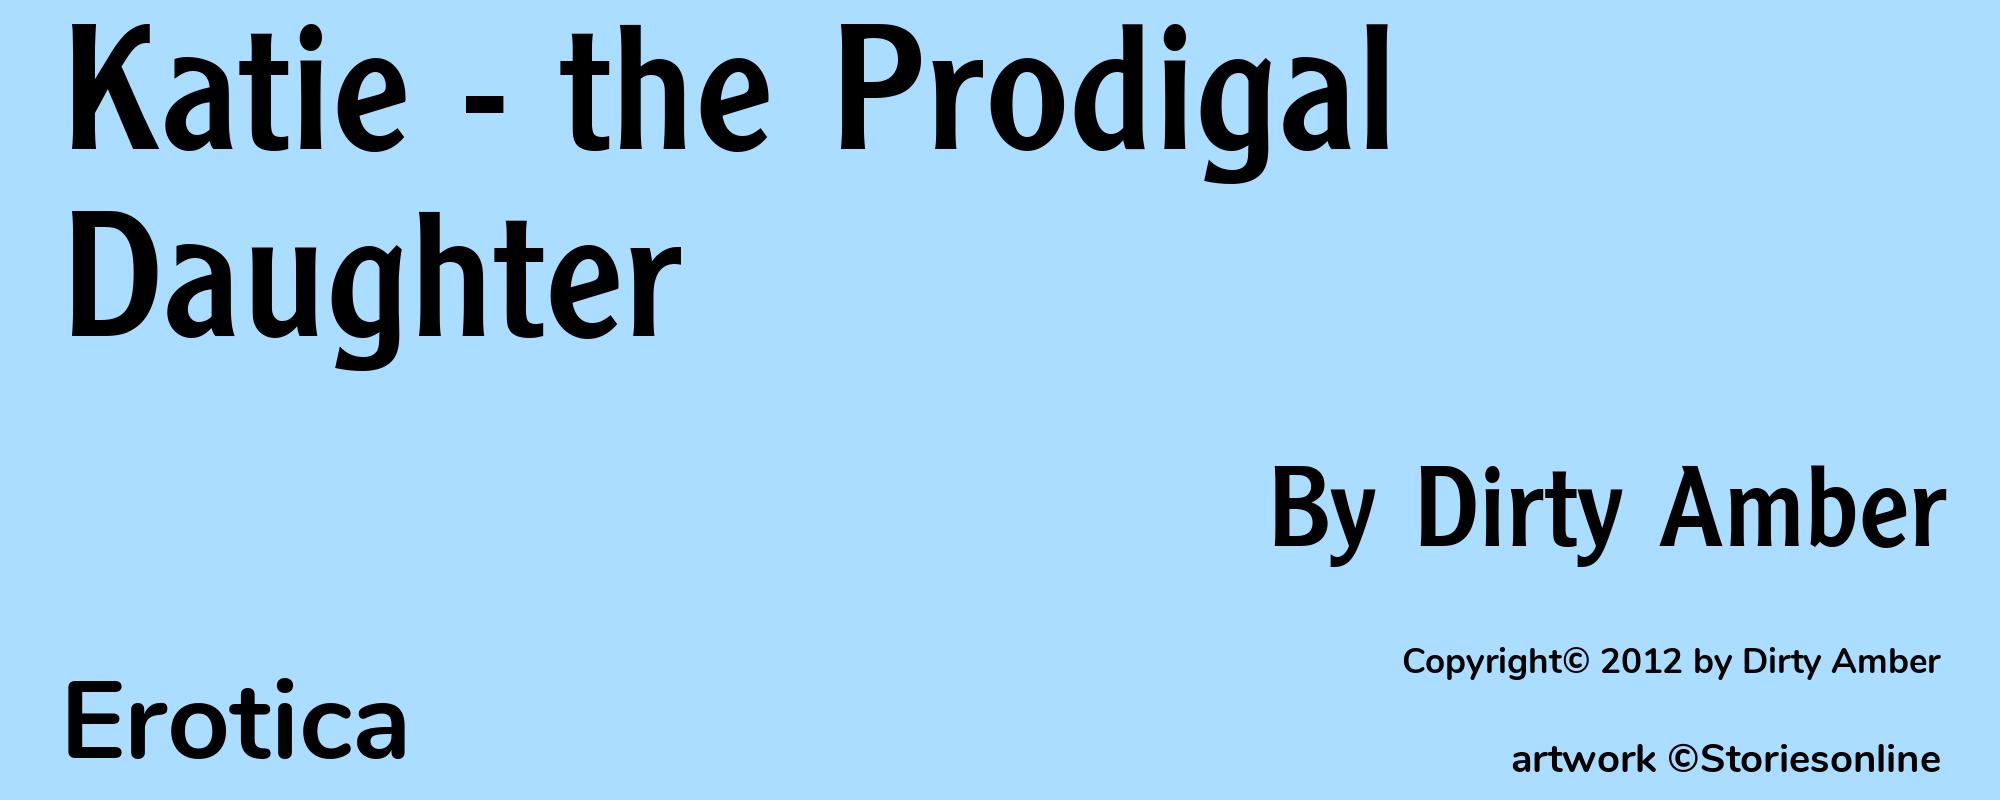 Katie - the Prodigal Daughter - Cover